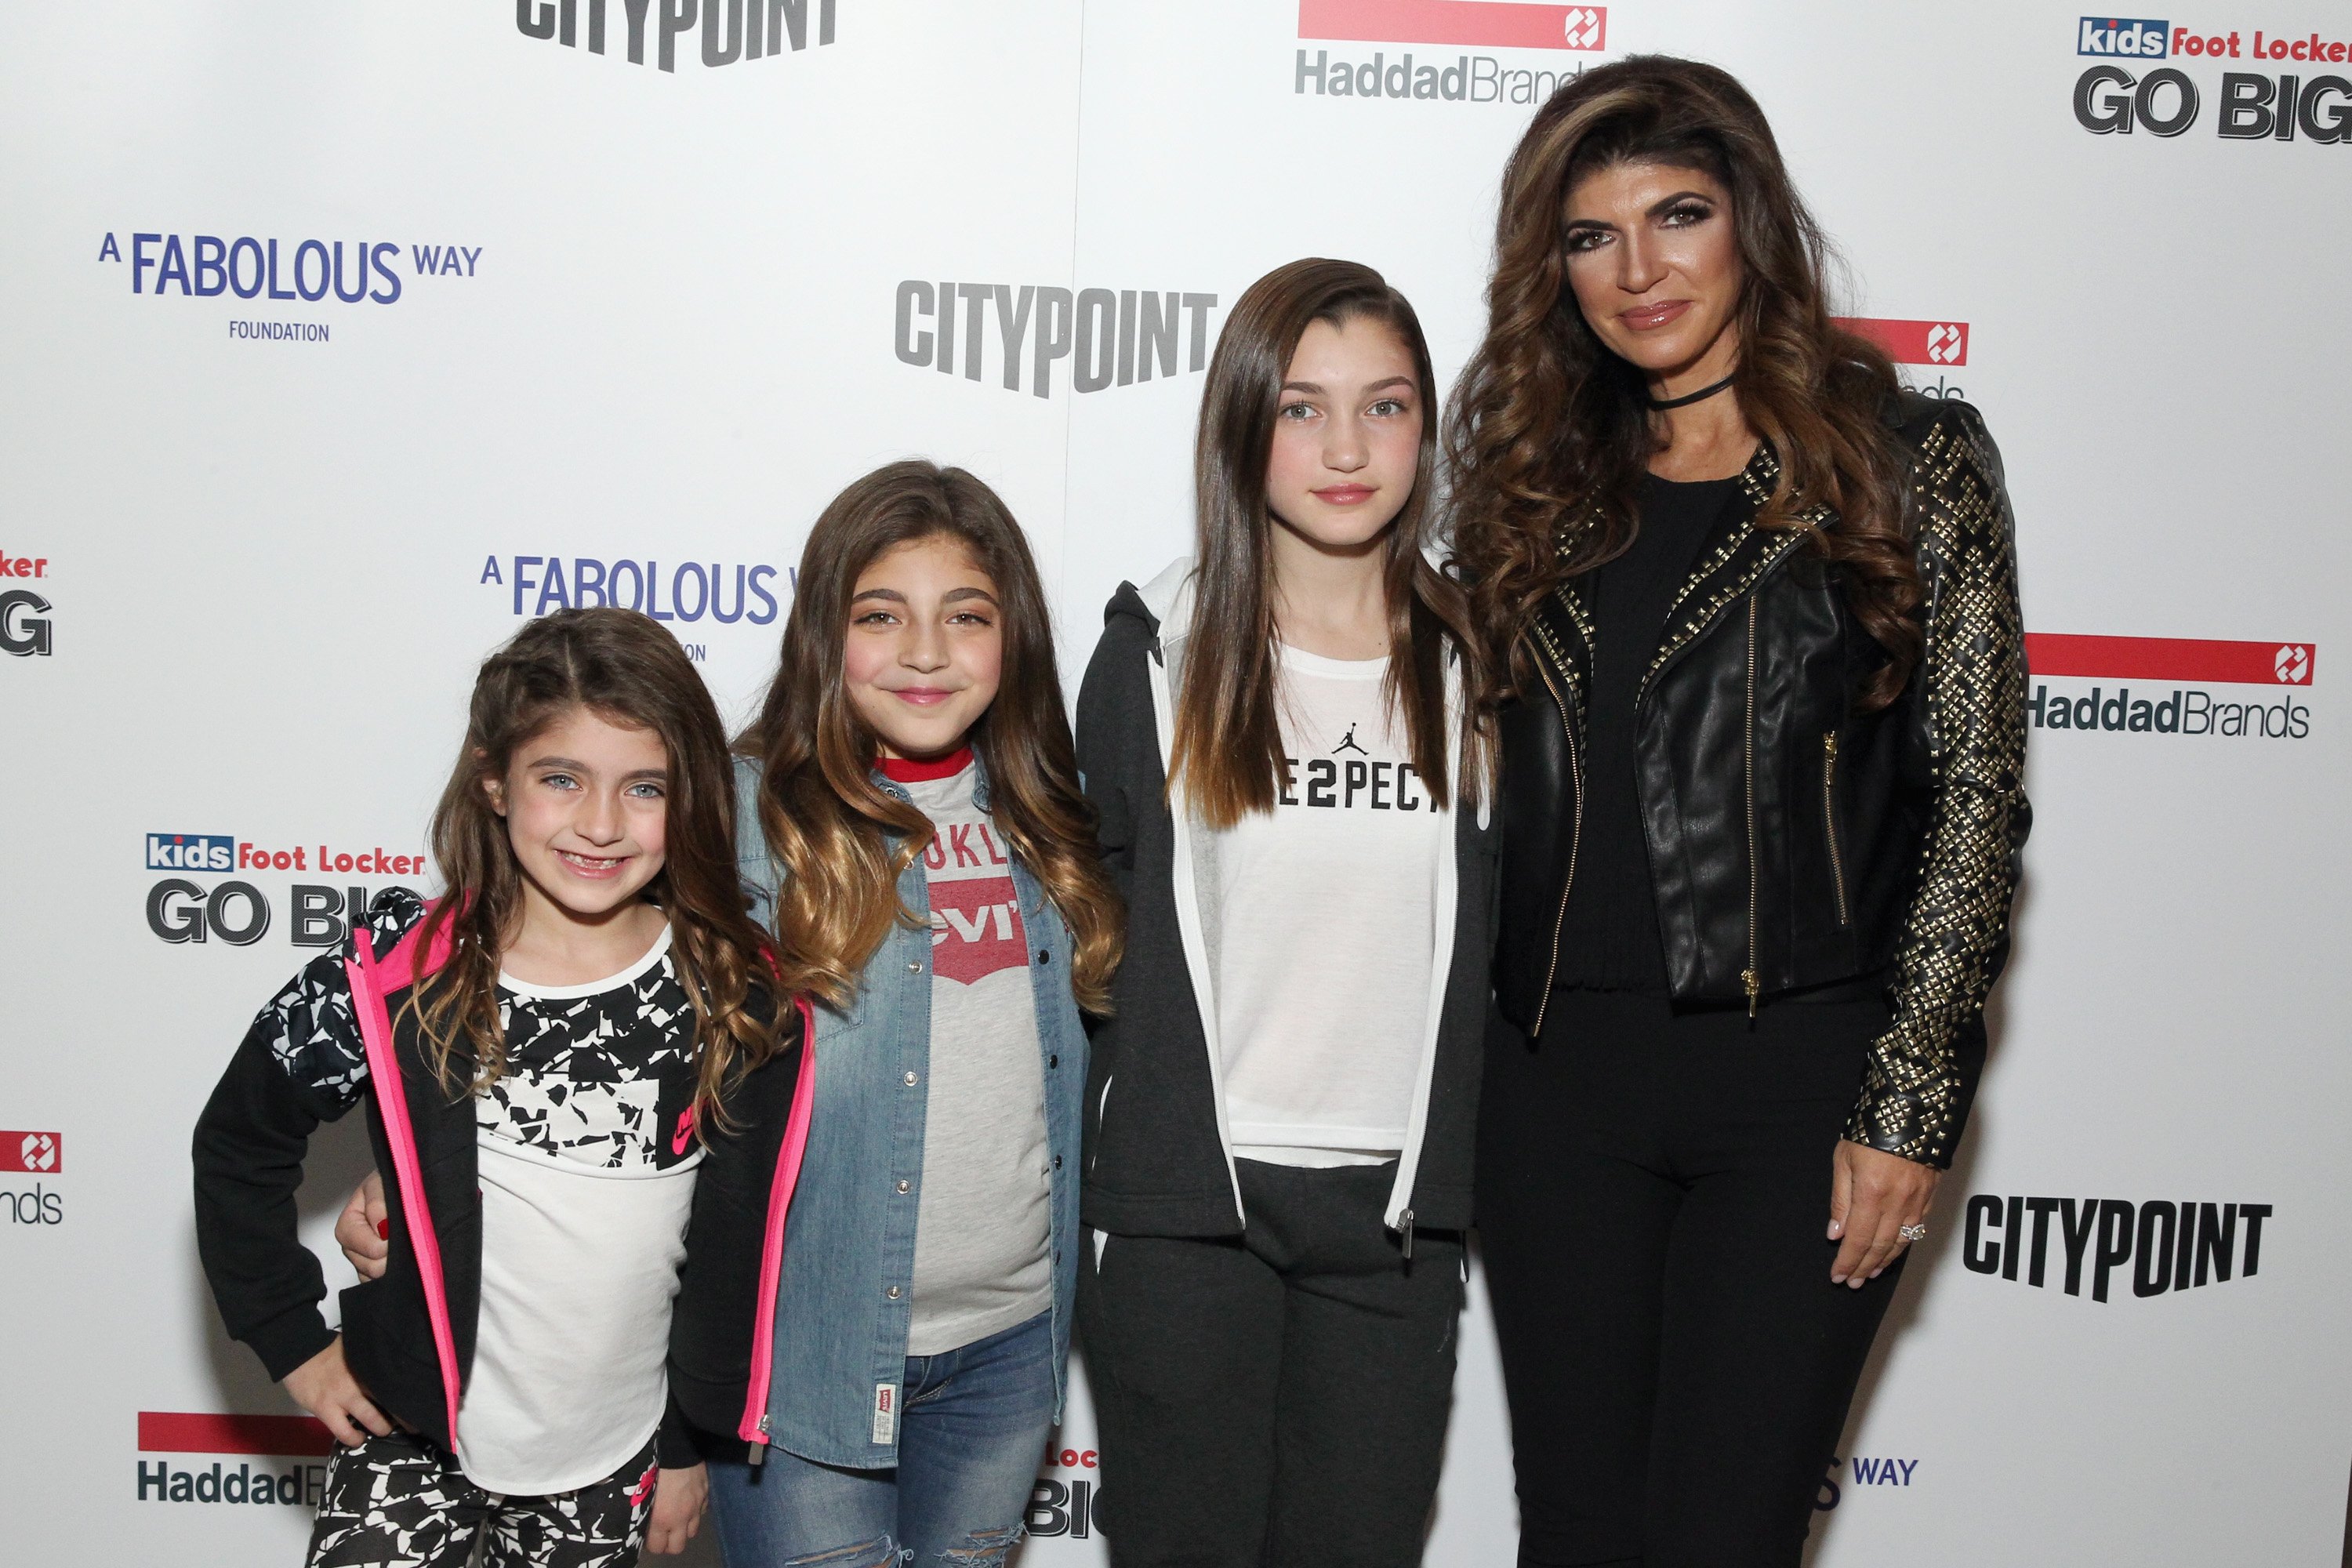 Who Is Gabriella Giudice Teresa Giudice Once Said Her Second Daughter Is The Smartest Of Her Kids